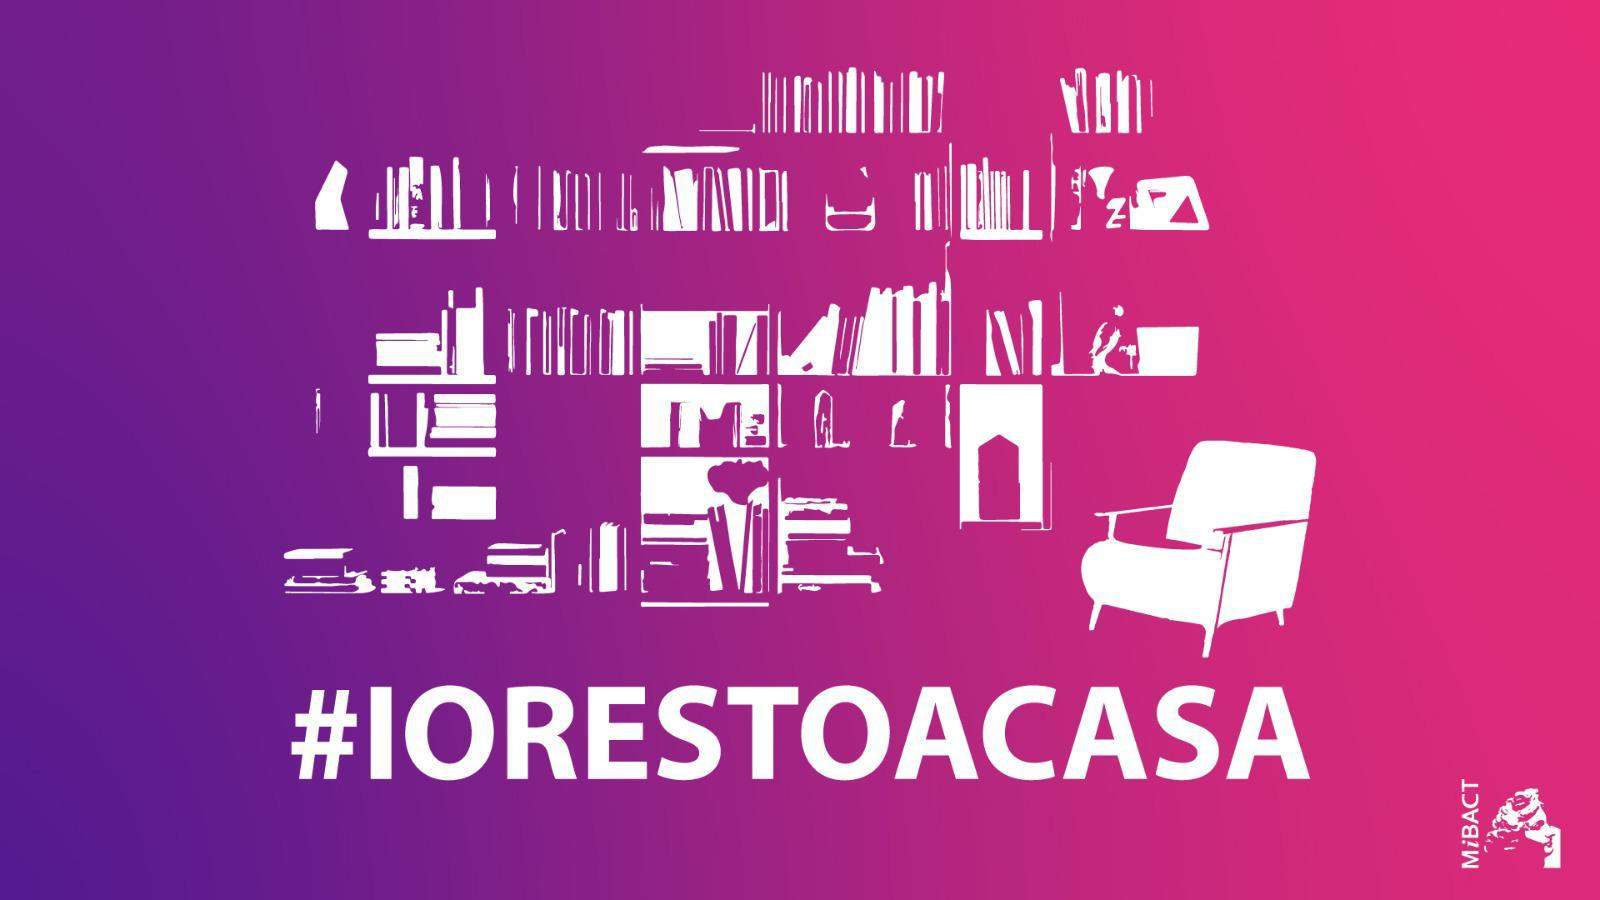 Stay at home! Now artists and museums are telling you too. #iorestoacasa is the hashtag to circulate